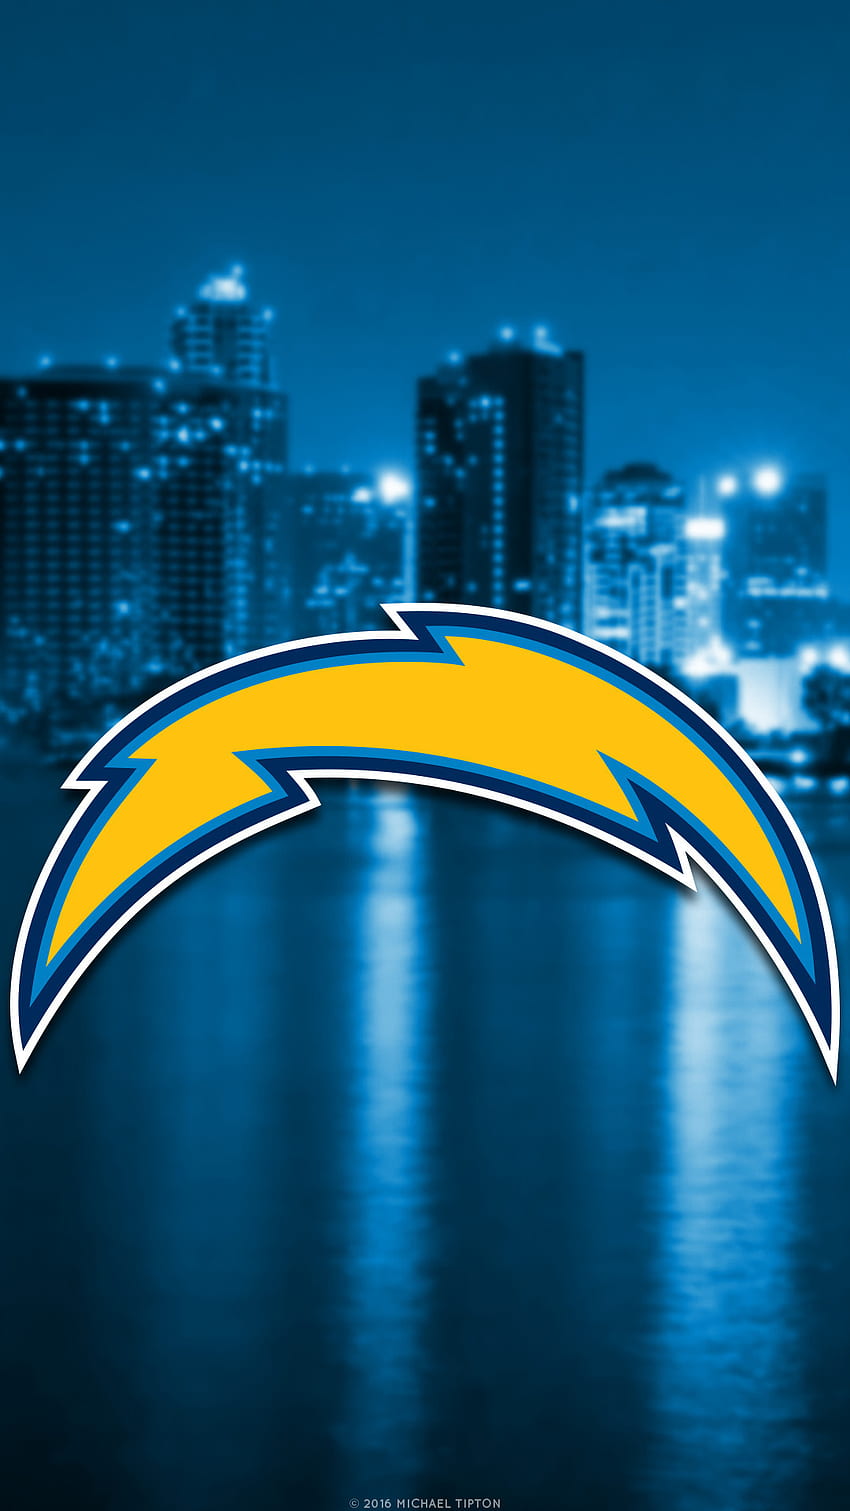 Latar belakang San Diego Chargers, Los Angeles Chargers wallpaper ponsel HD